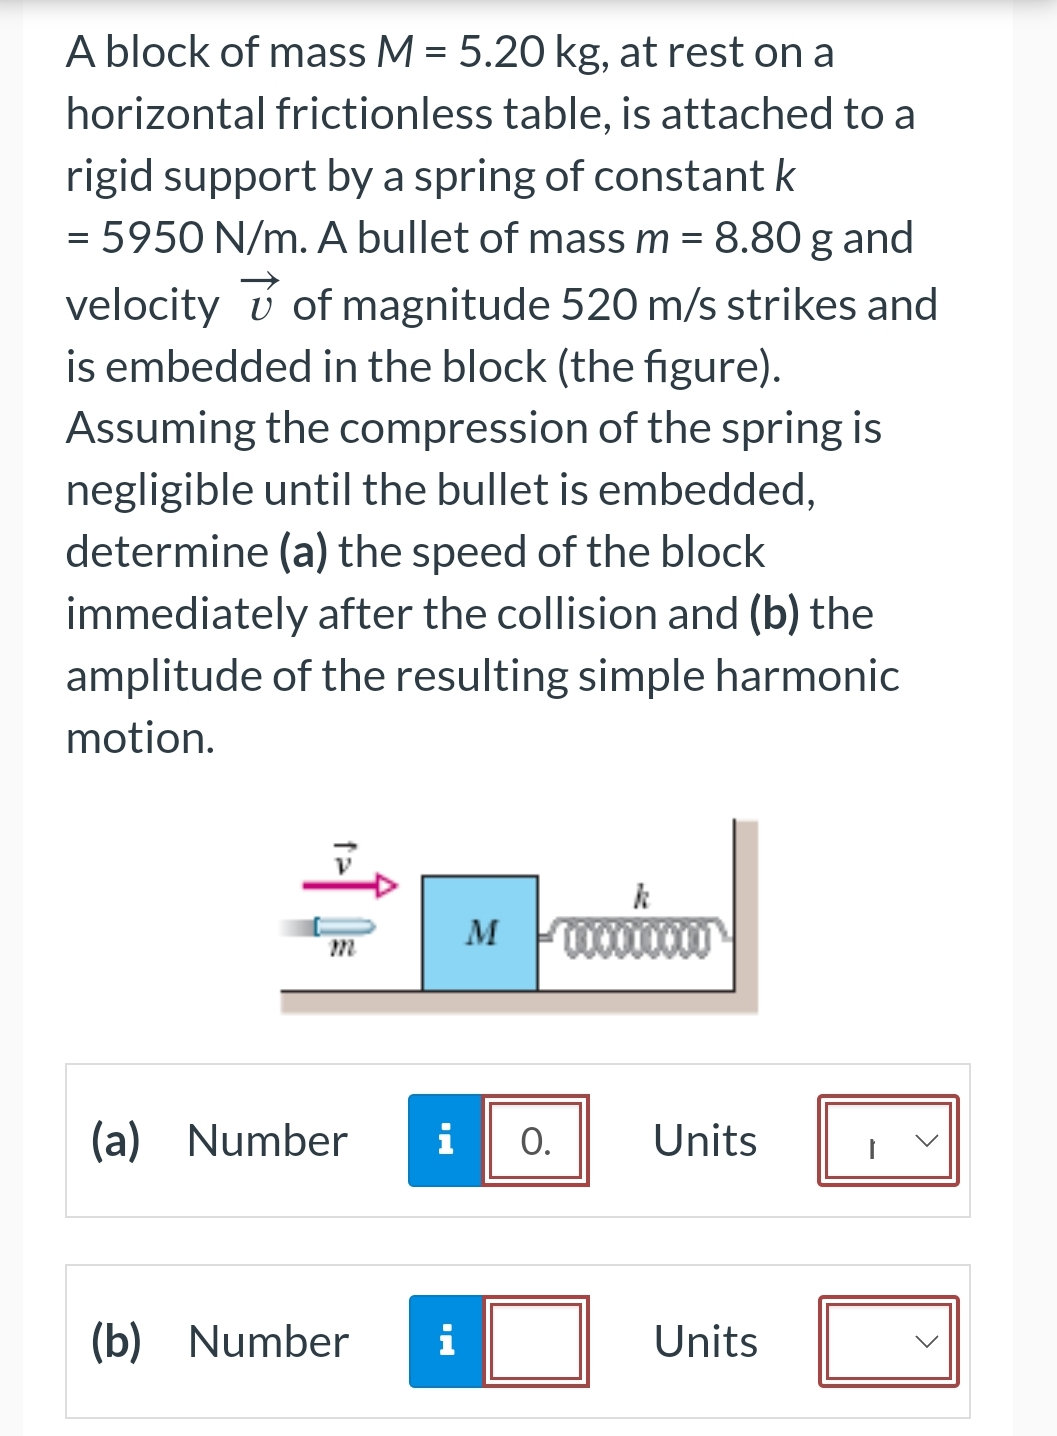 A block of mass M = 5.20 kg, at rest on a
horizontal frictionless table, is attached to a
rigid support by a spring of constant k
= 5950 N/m. A bullet of mass m = 8.80 g and
velocity of magnitude 520 m/s strikes and
is embedded in the block (the figure).
Assuming the compression of the spring is
negligible until the bullet is embedded,
determine (a) the speed of the block
immediately after the collision and (b) the
amplitude of the resulting simple harmonic
motion.
(a) Number
M
i O.
(b) Number i
xxxxxxx
Units
Units
1
>